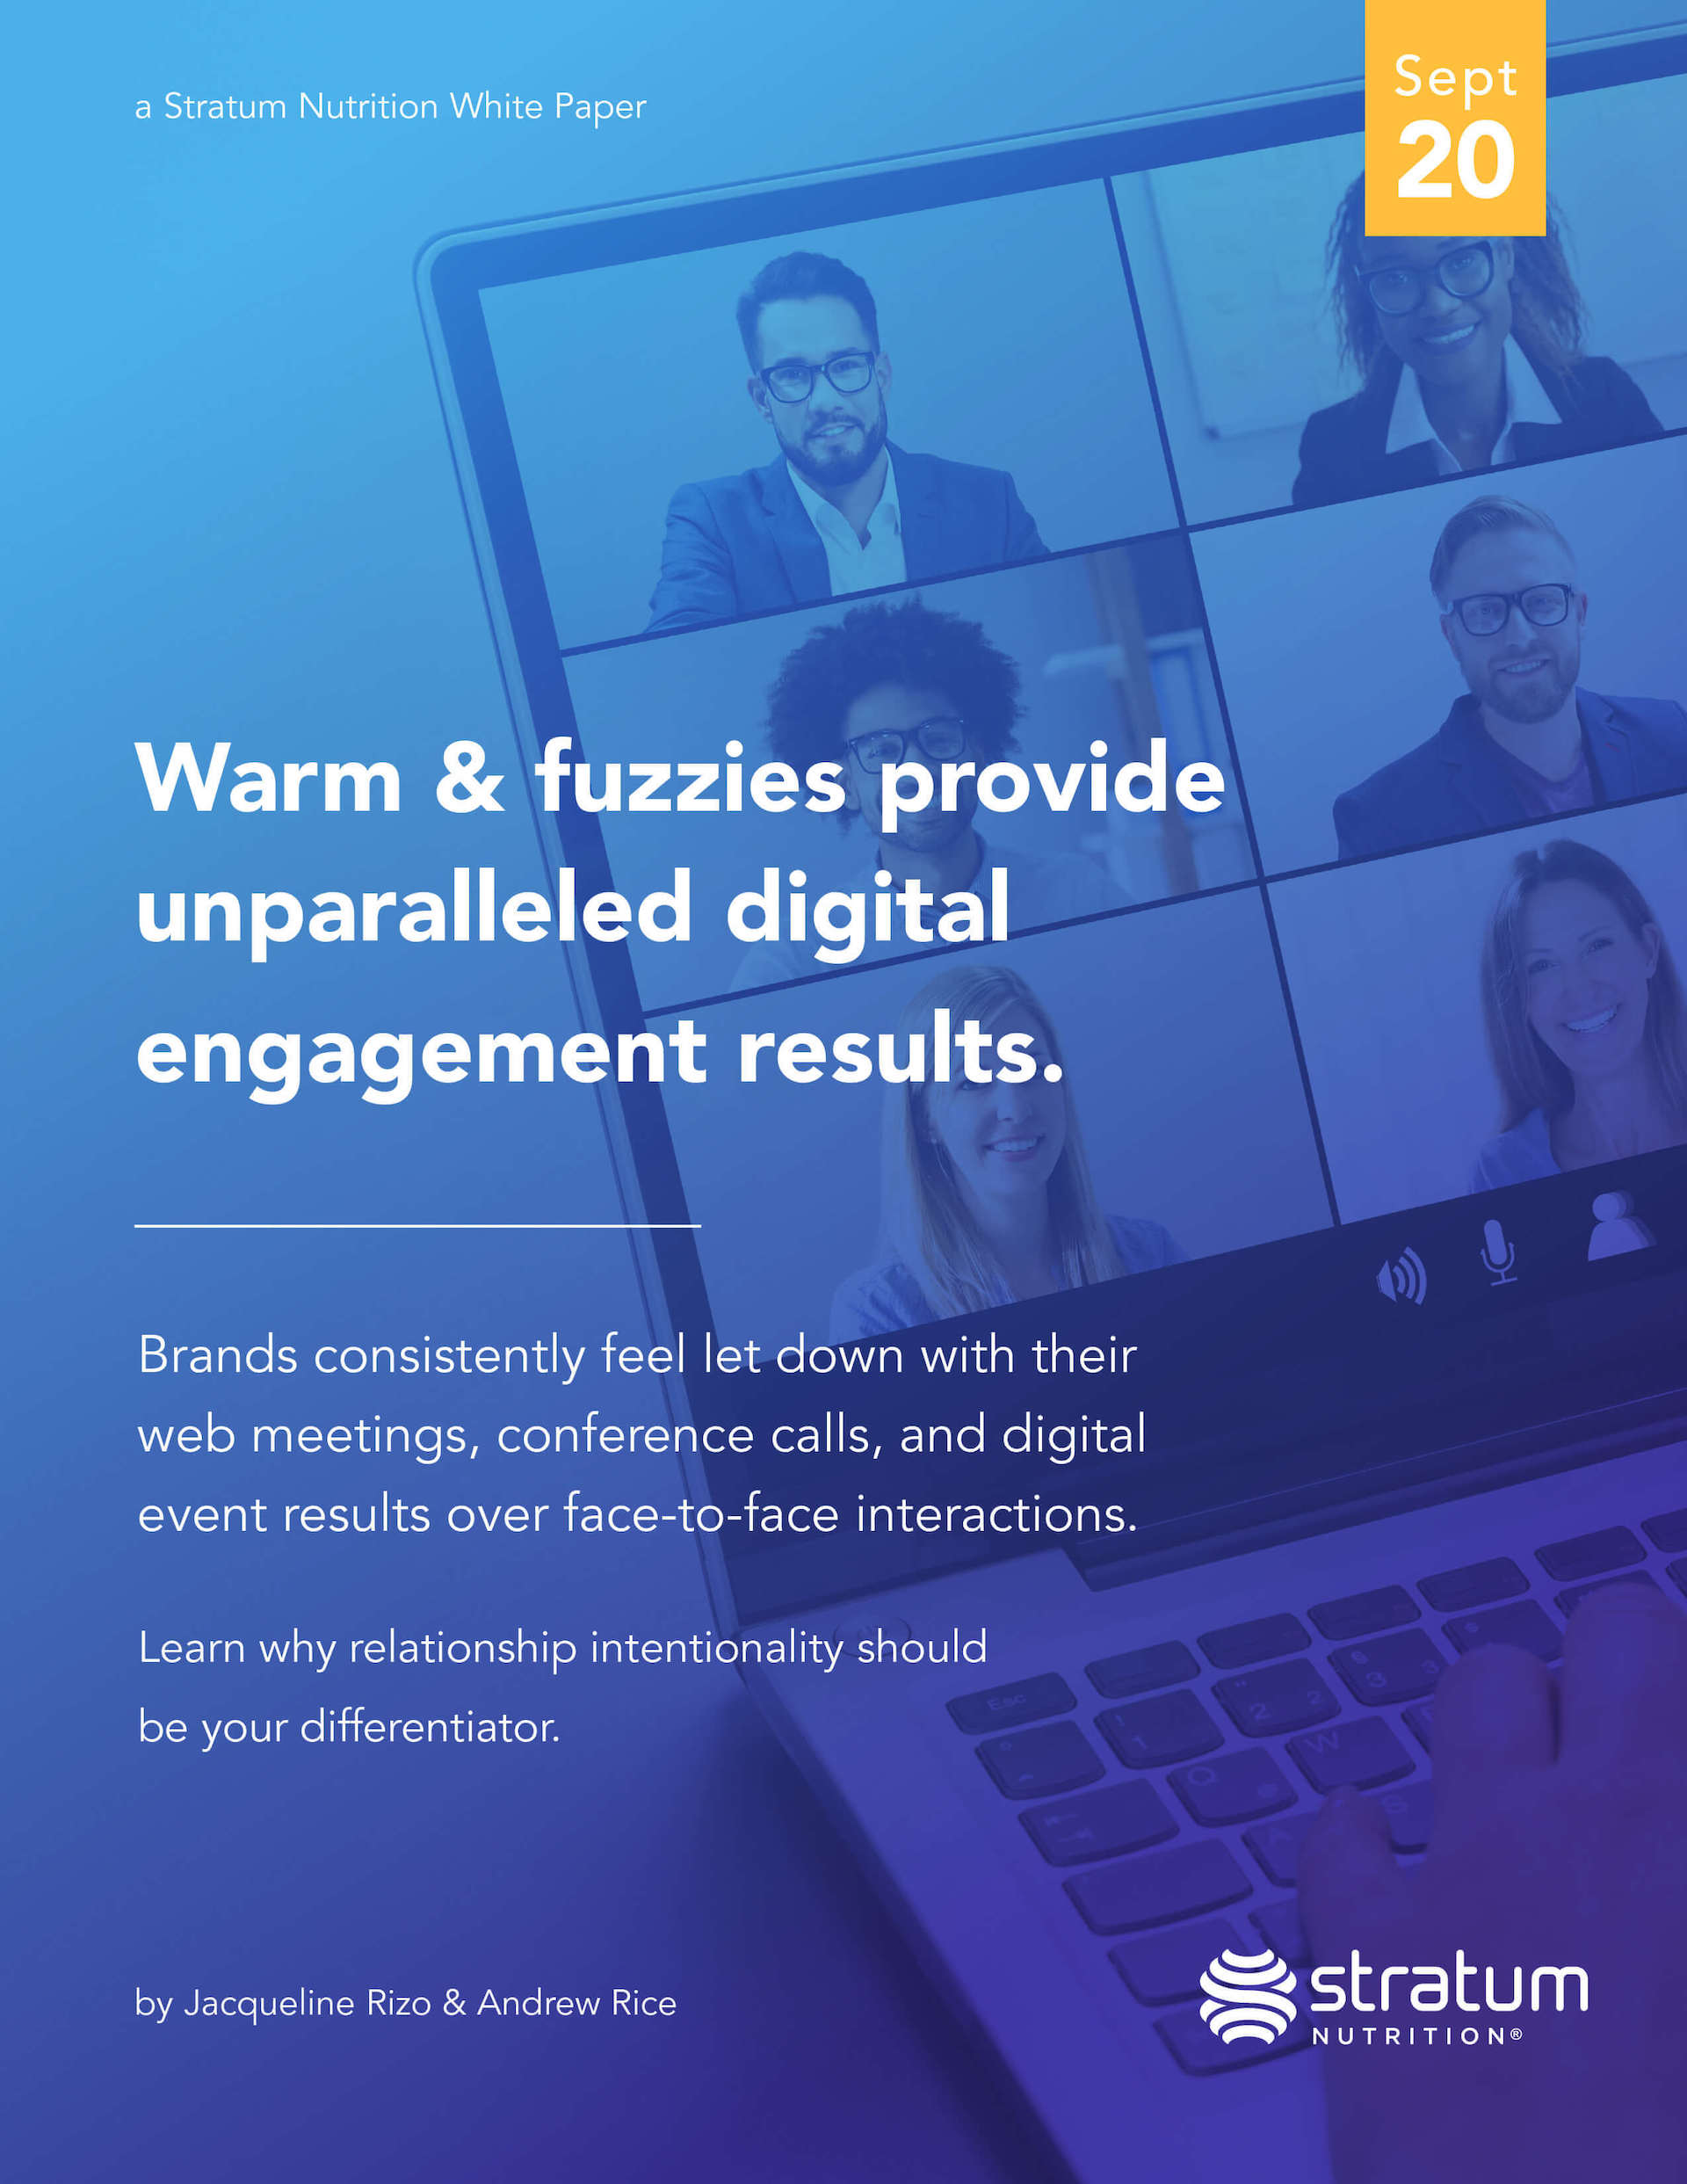 Warm & Fuzzies Provide Unparalleled Digital Engagement Results blog image